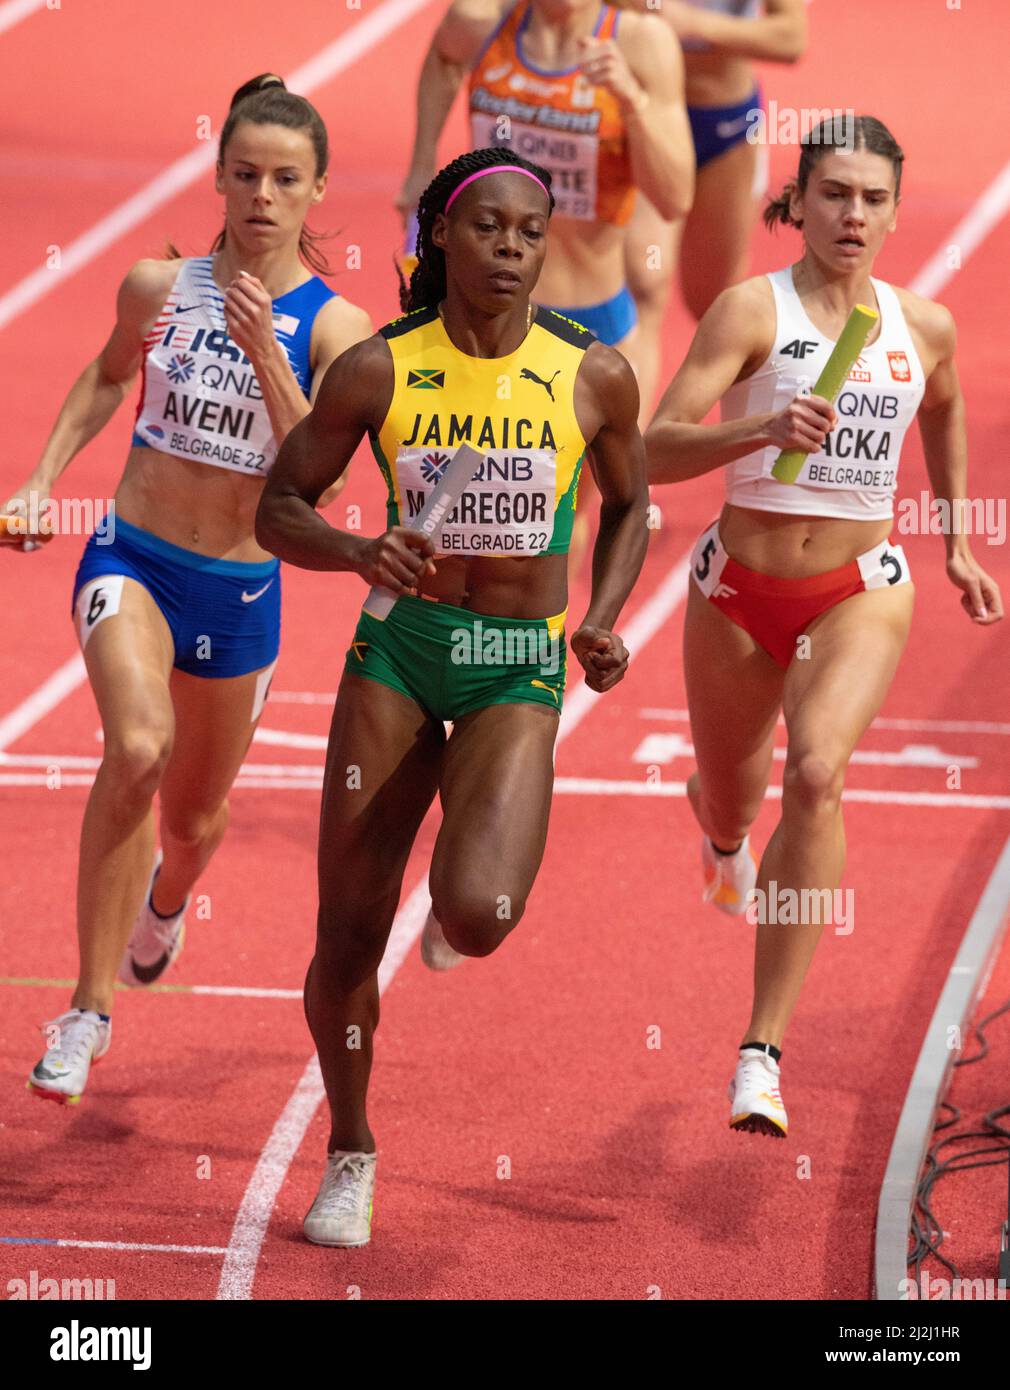 Brittany Aveni, Roneisha McGregor and Kinga Gacka running the third leg in the women’s relay final’s on Day Three of the World Athletics Indoor Champi Stock Photo